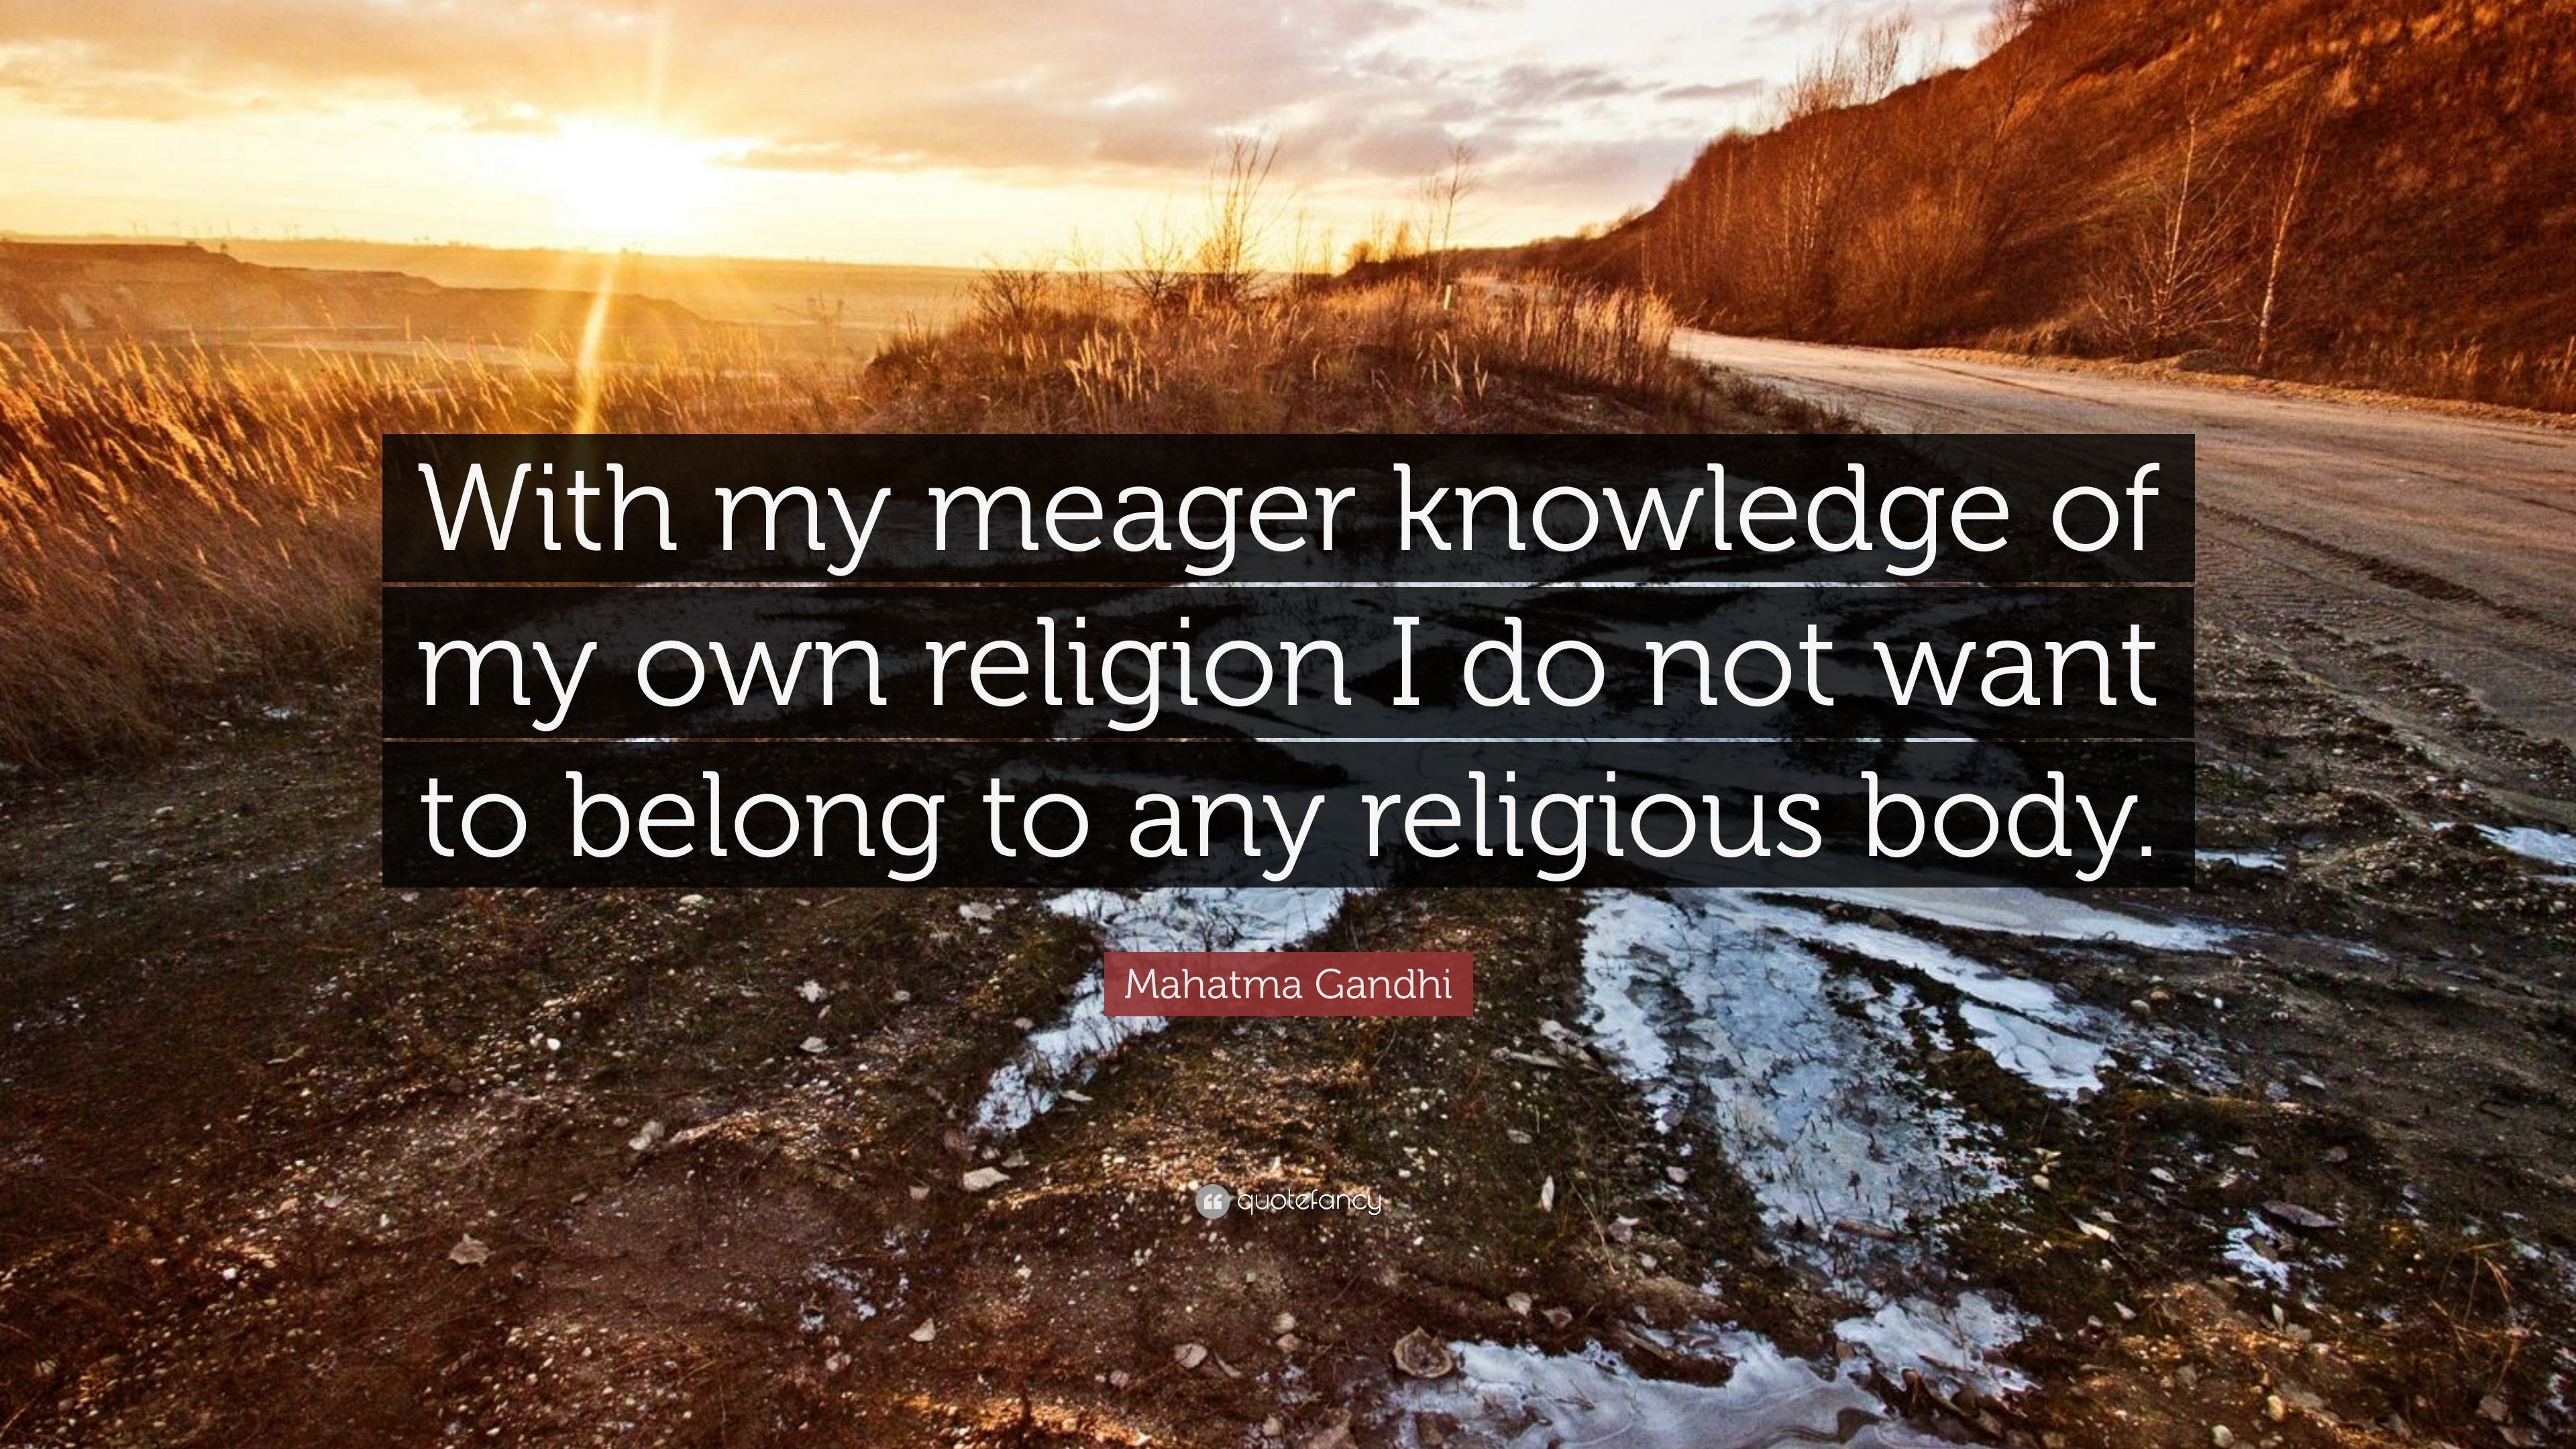 Mahatma Gandhi Quote “With my meager knowledge of my own religion I do